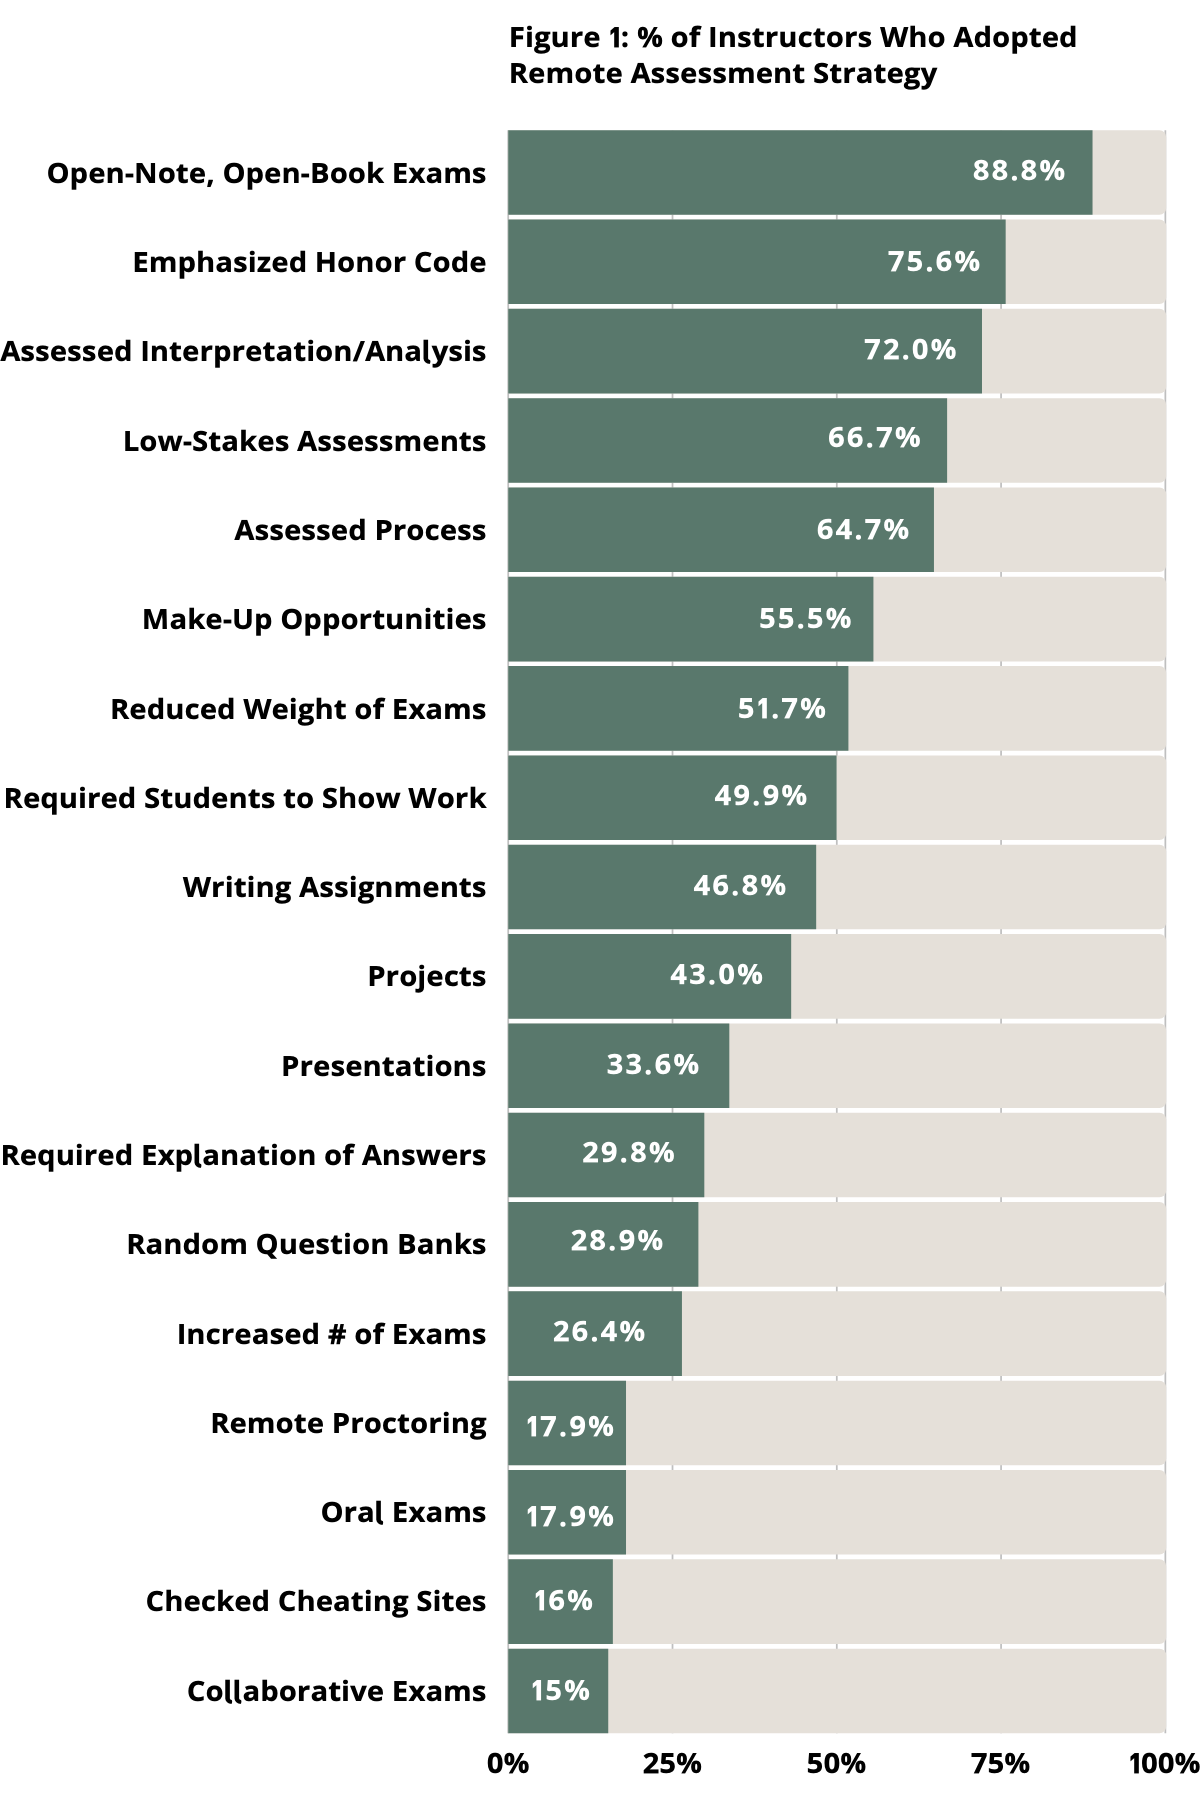 Percent of Instructors Who Adopted Remote Assessment Strategies